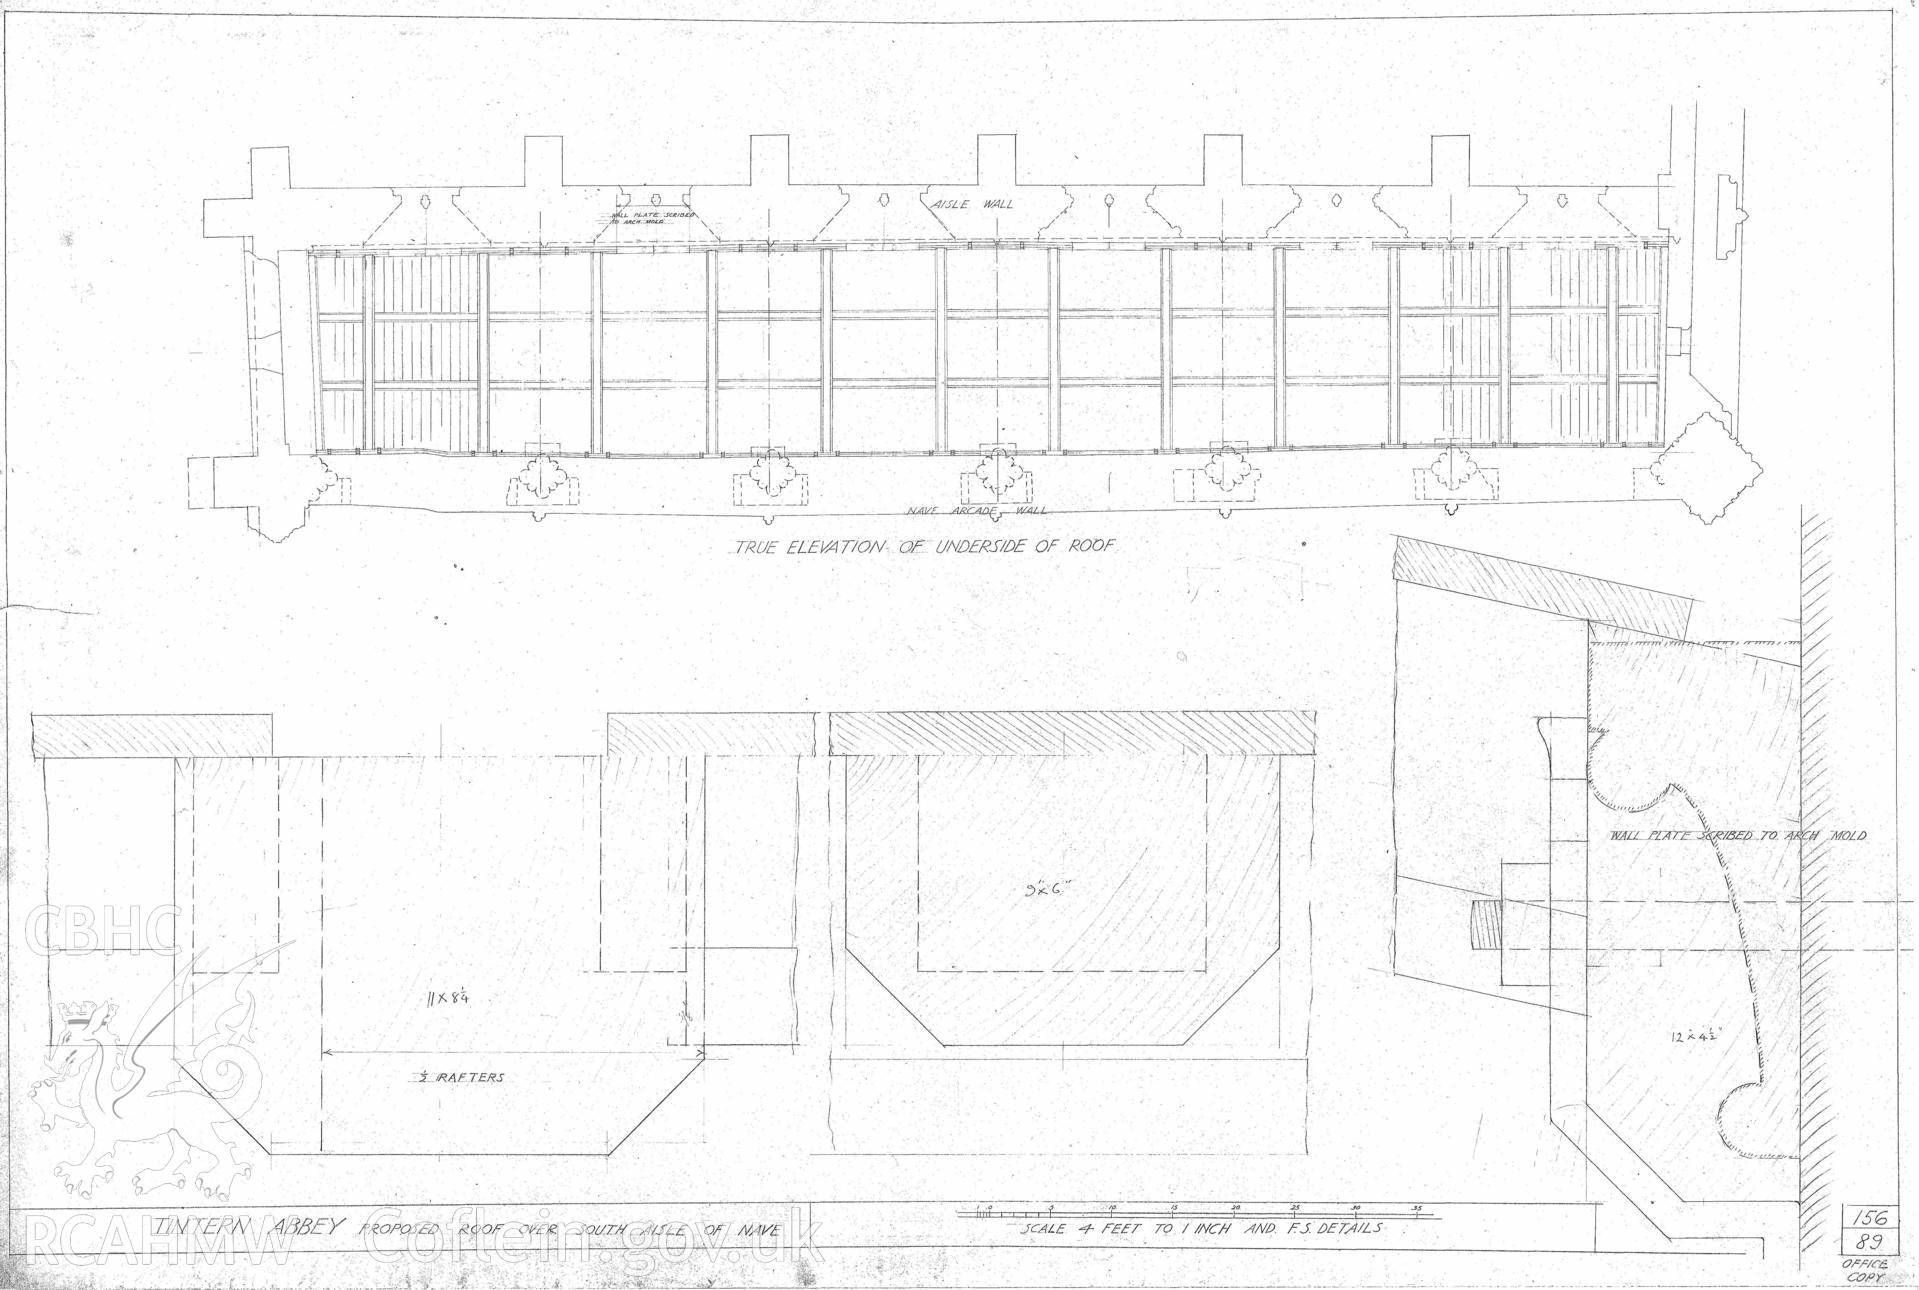 Cadw guardianship monument drawing of Tintern Abbey. Proposed Roof S Aisle of Nave. Cadw ref. No. 156/89. Scale 1:48;1.